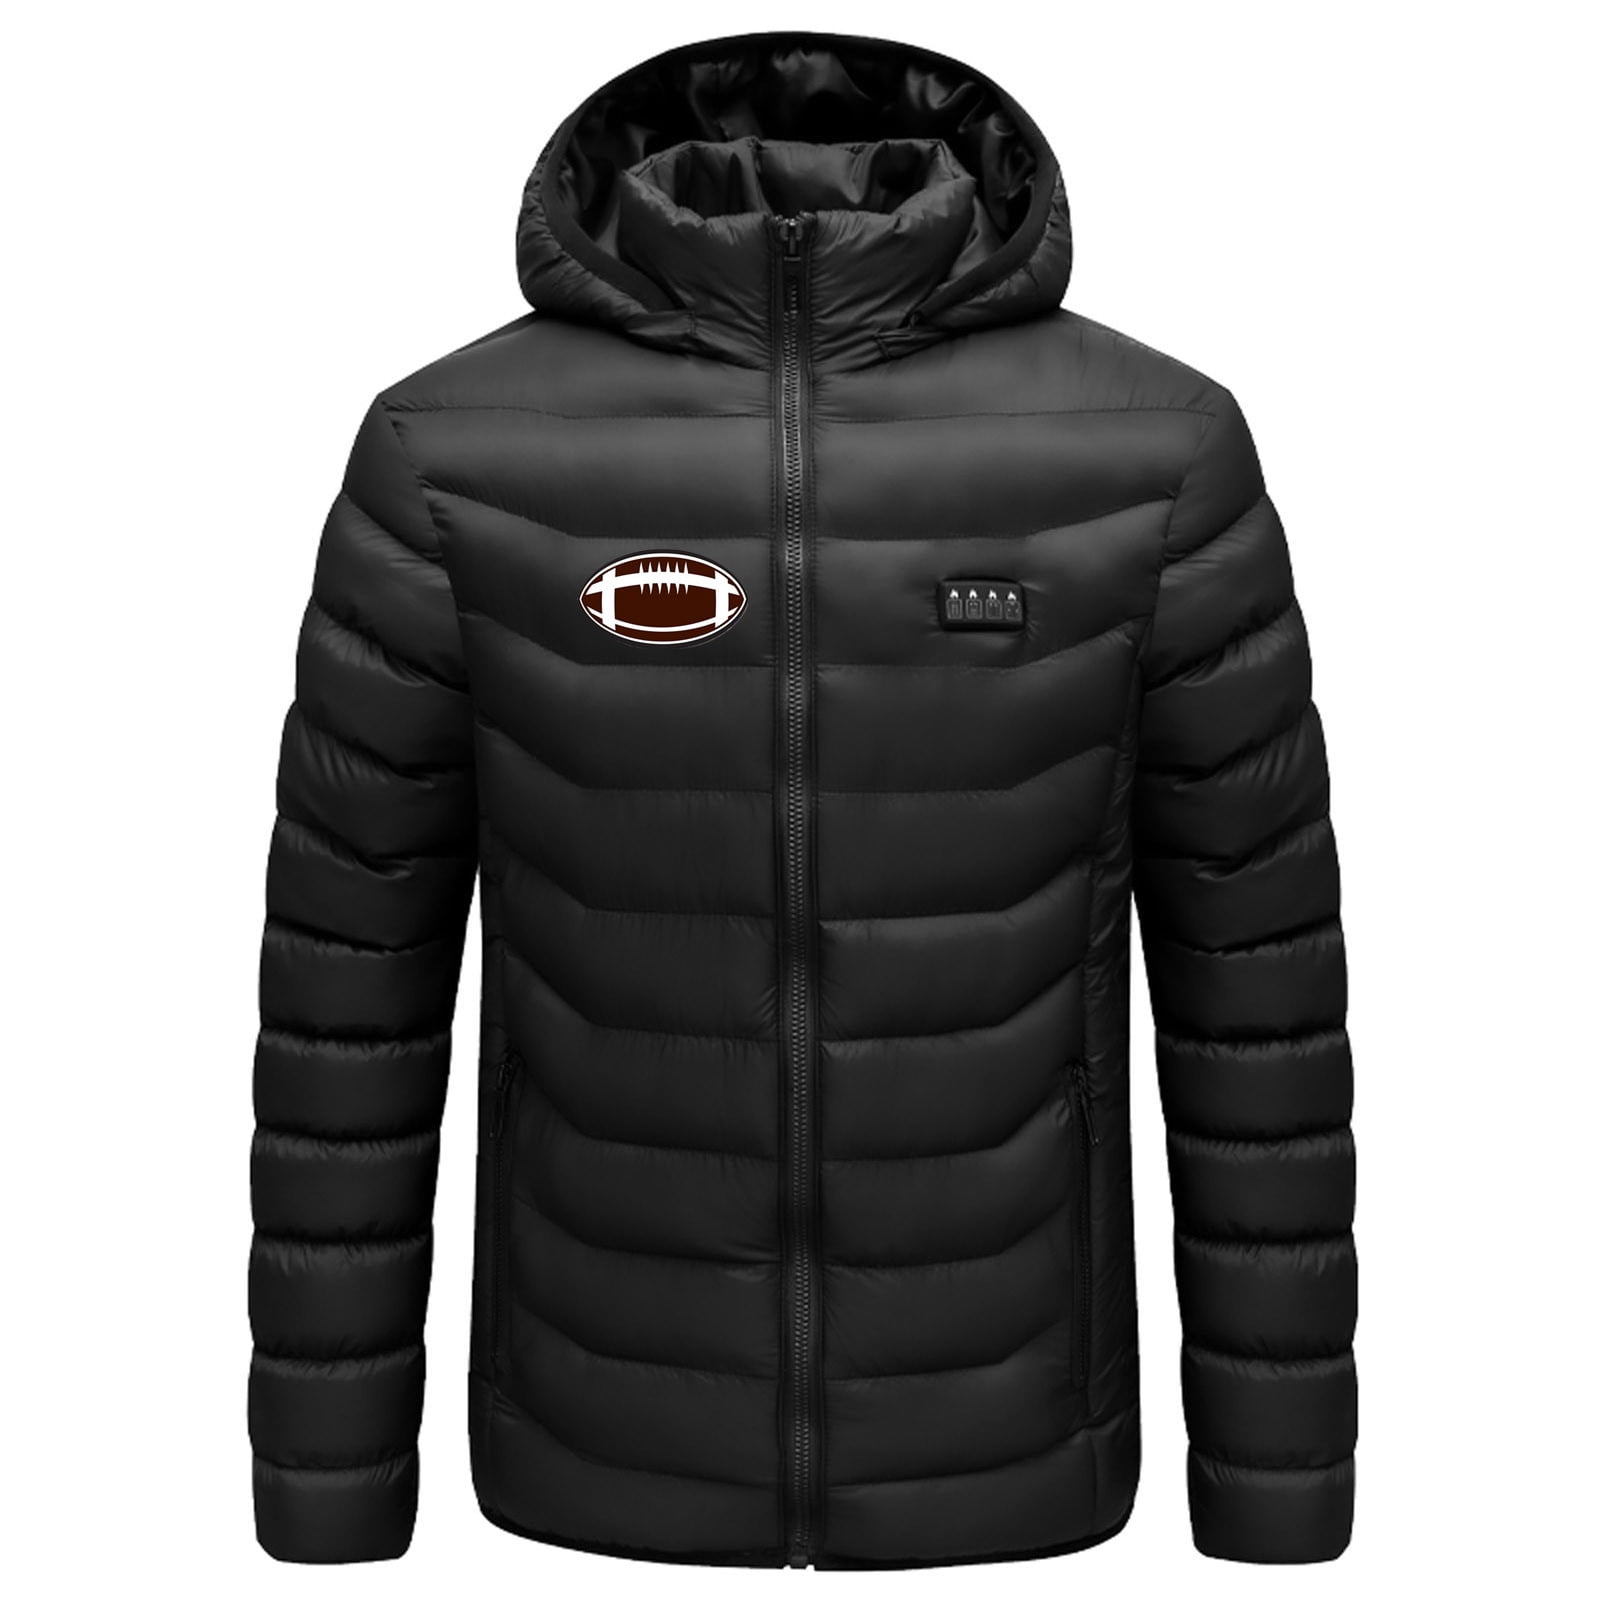 VSSSJ Heated Jackets for Women and Men Big and Tall 4 Control and 19  Heating Zones Puffer Heated Coats with Hooded Outdoor Riding Skiing Fishing  Charging Via Heated Jacket Black XL 